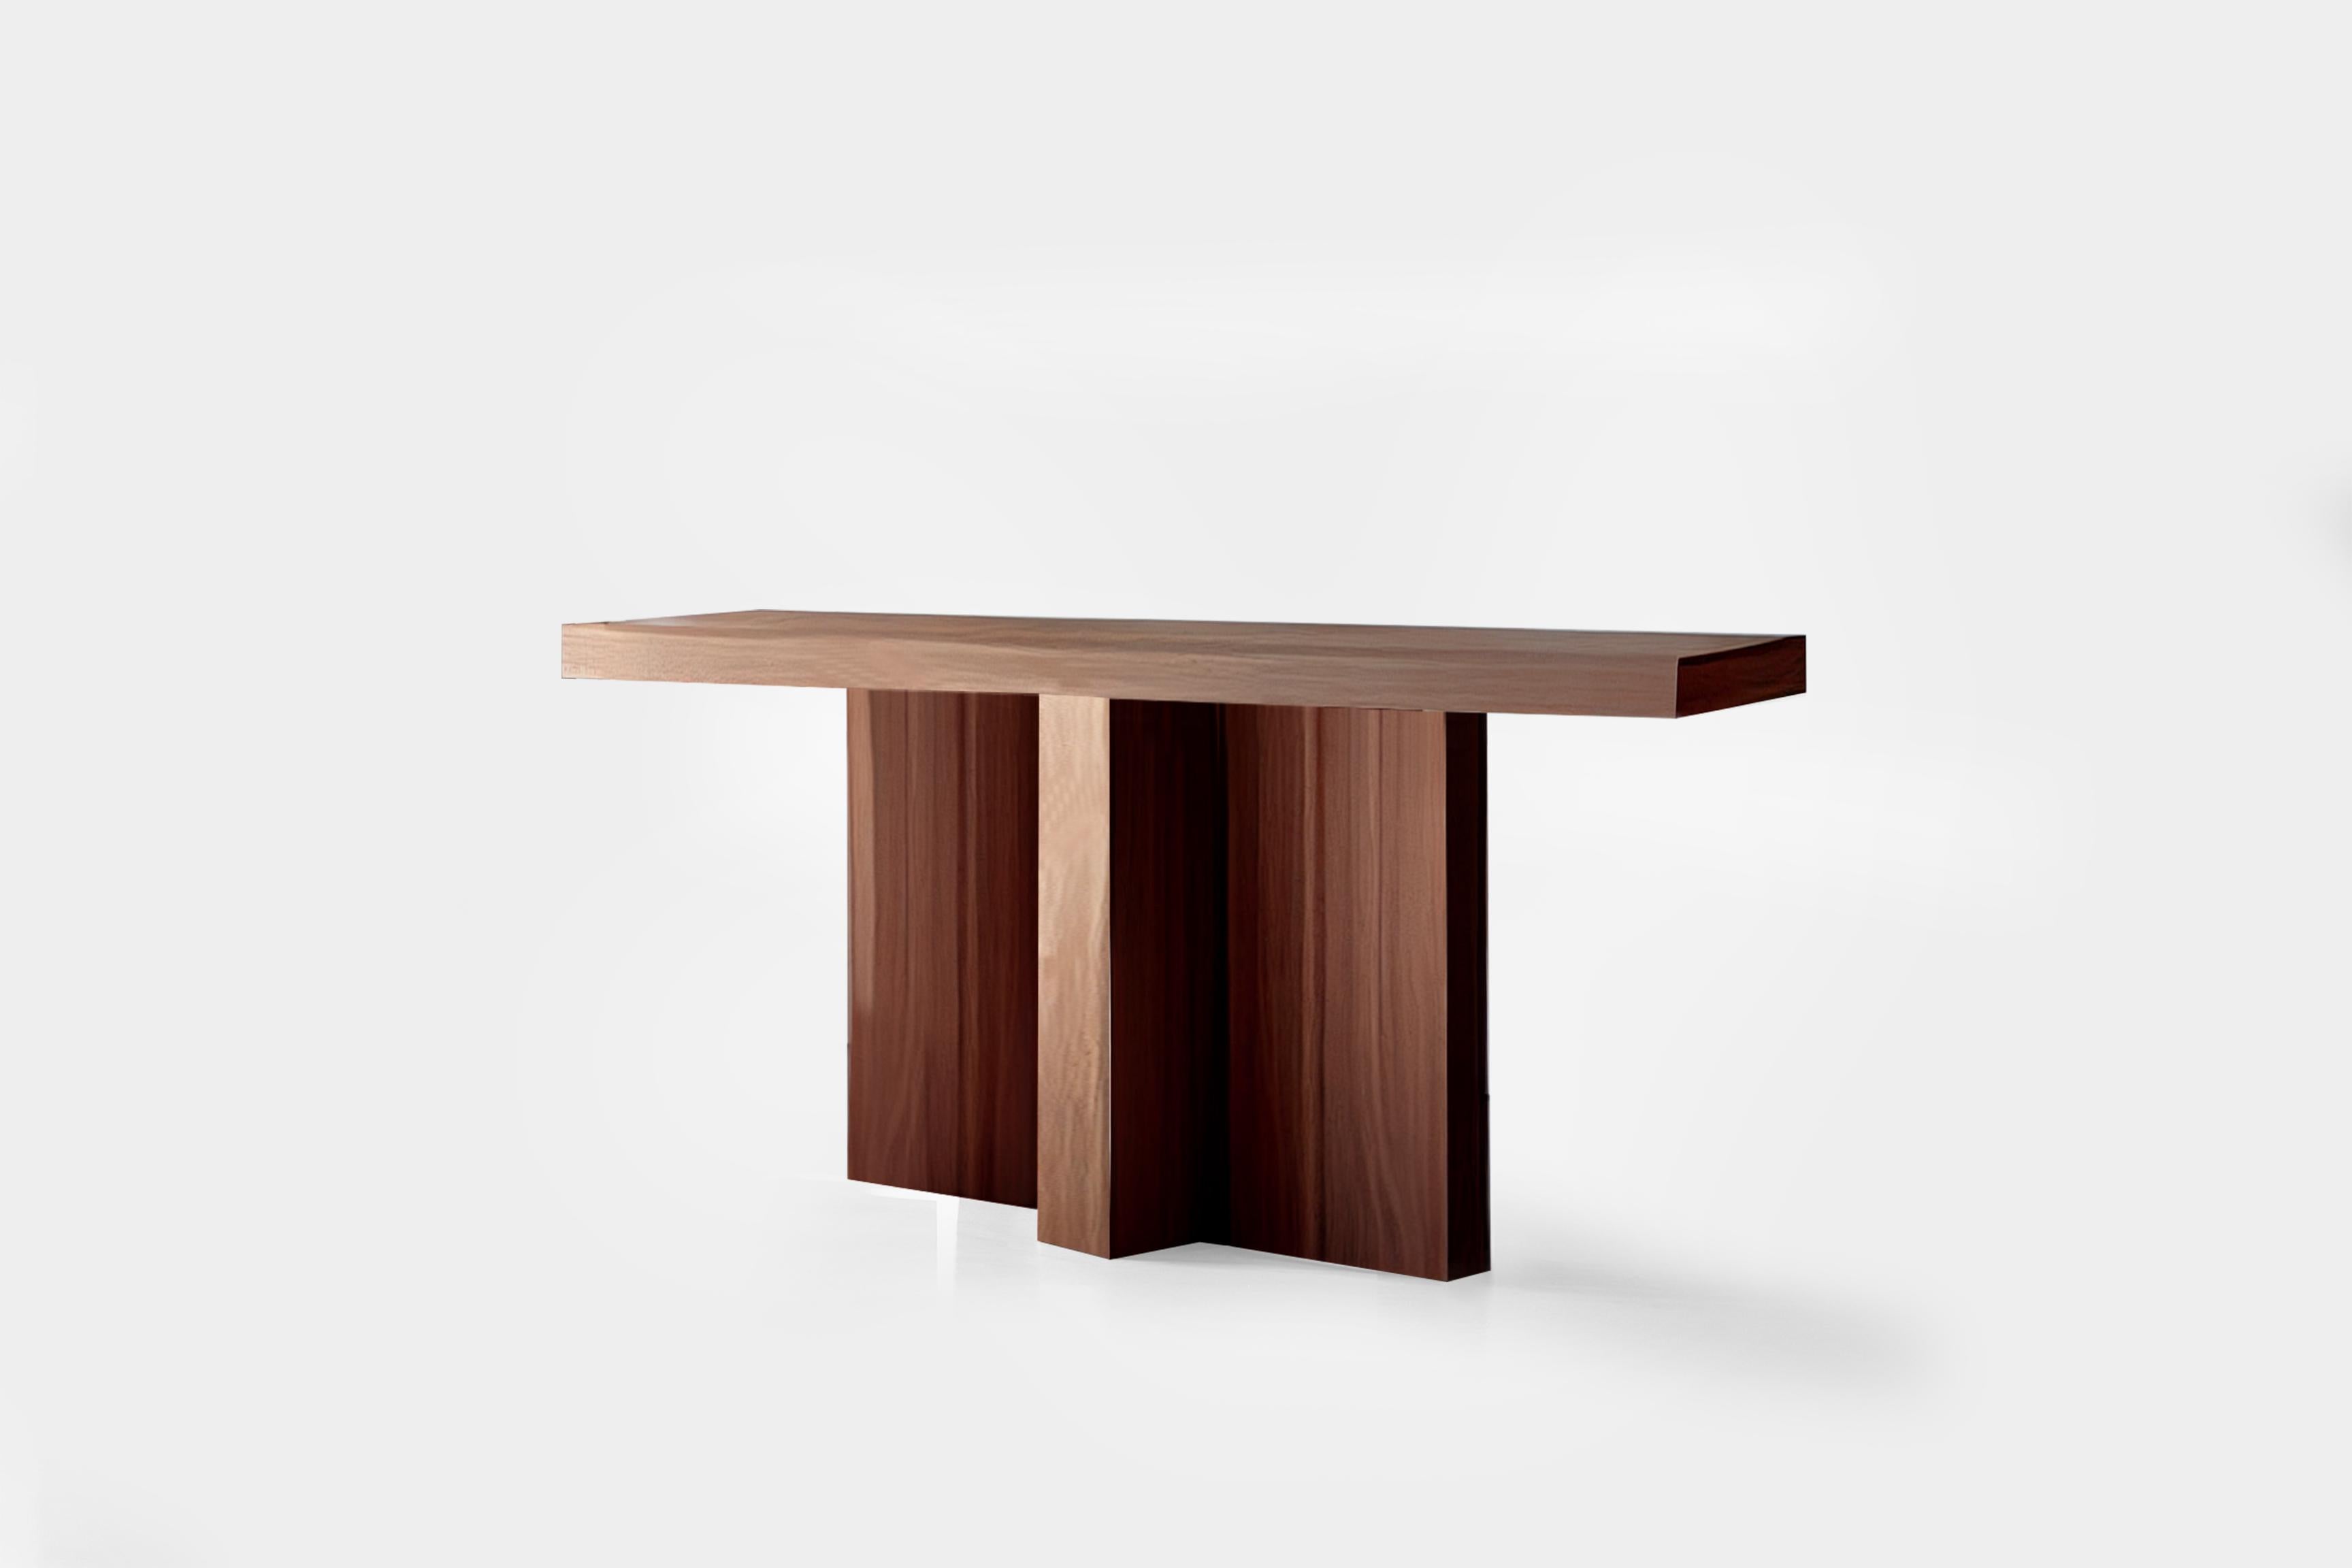 Mexican Basic Console Table, Sideboard Made of Solid Walnut Wood, Narrow Console by Nono For Sale